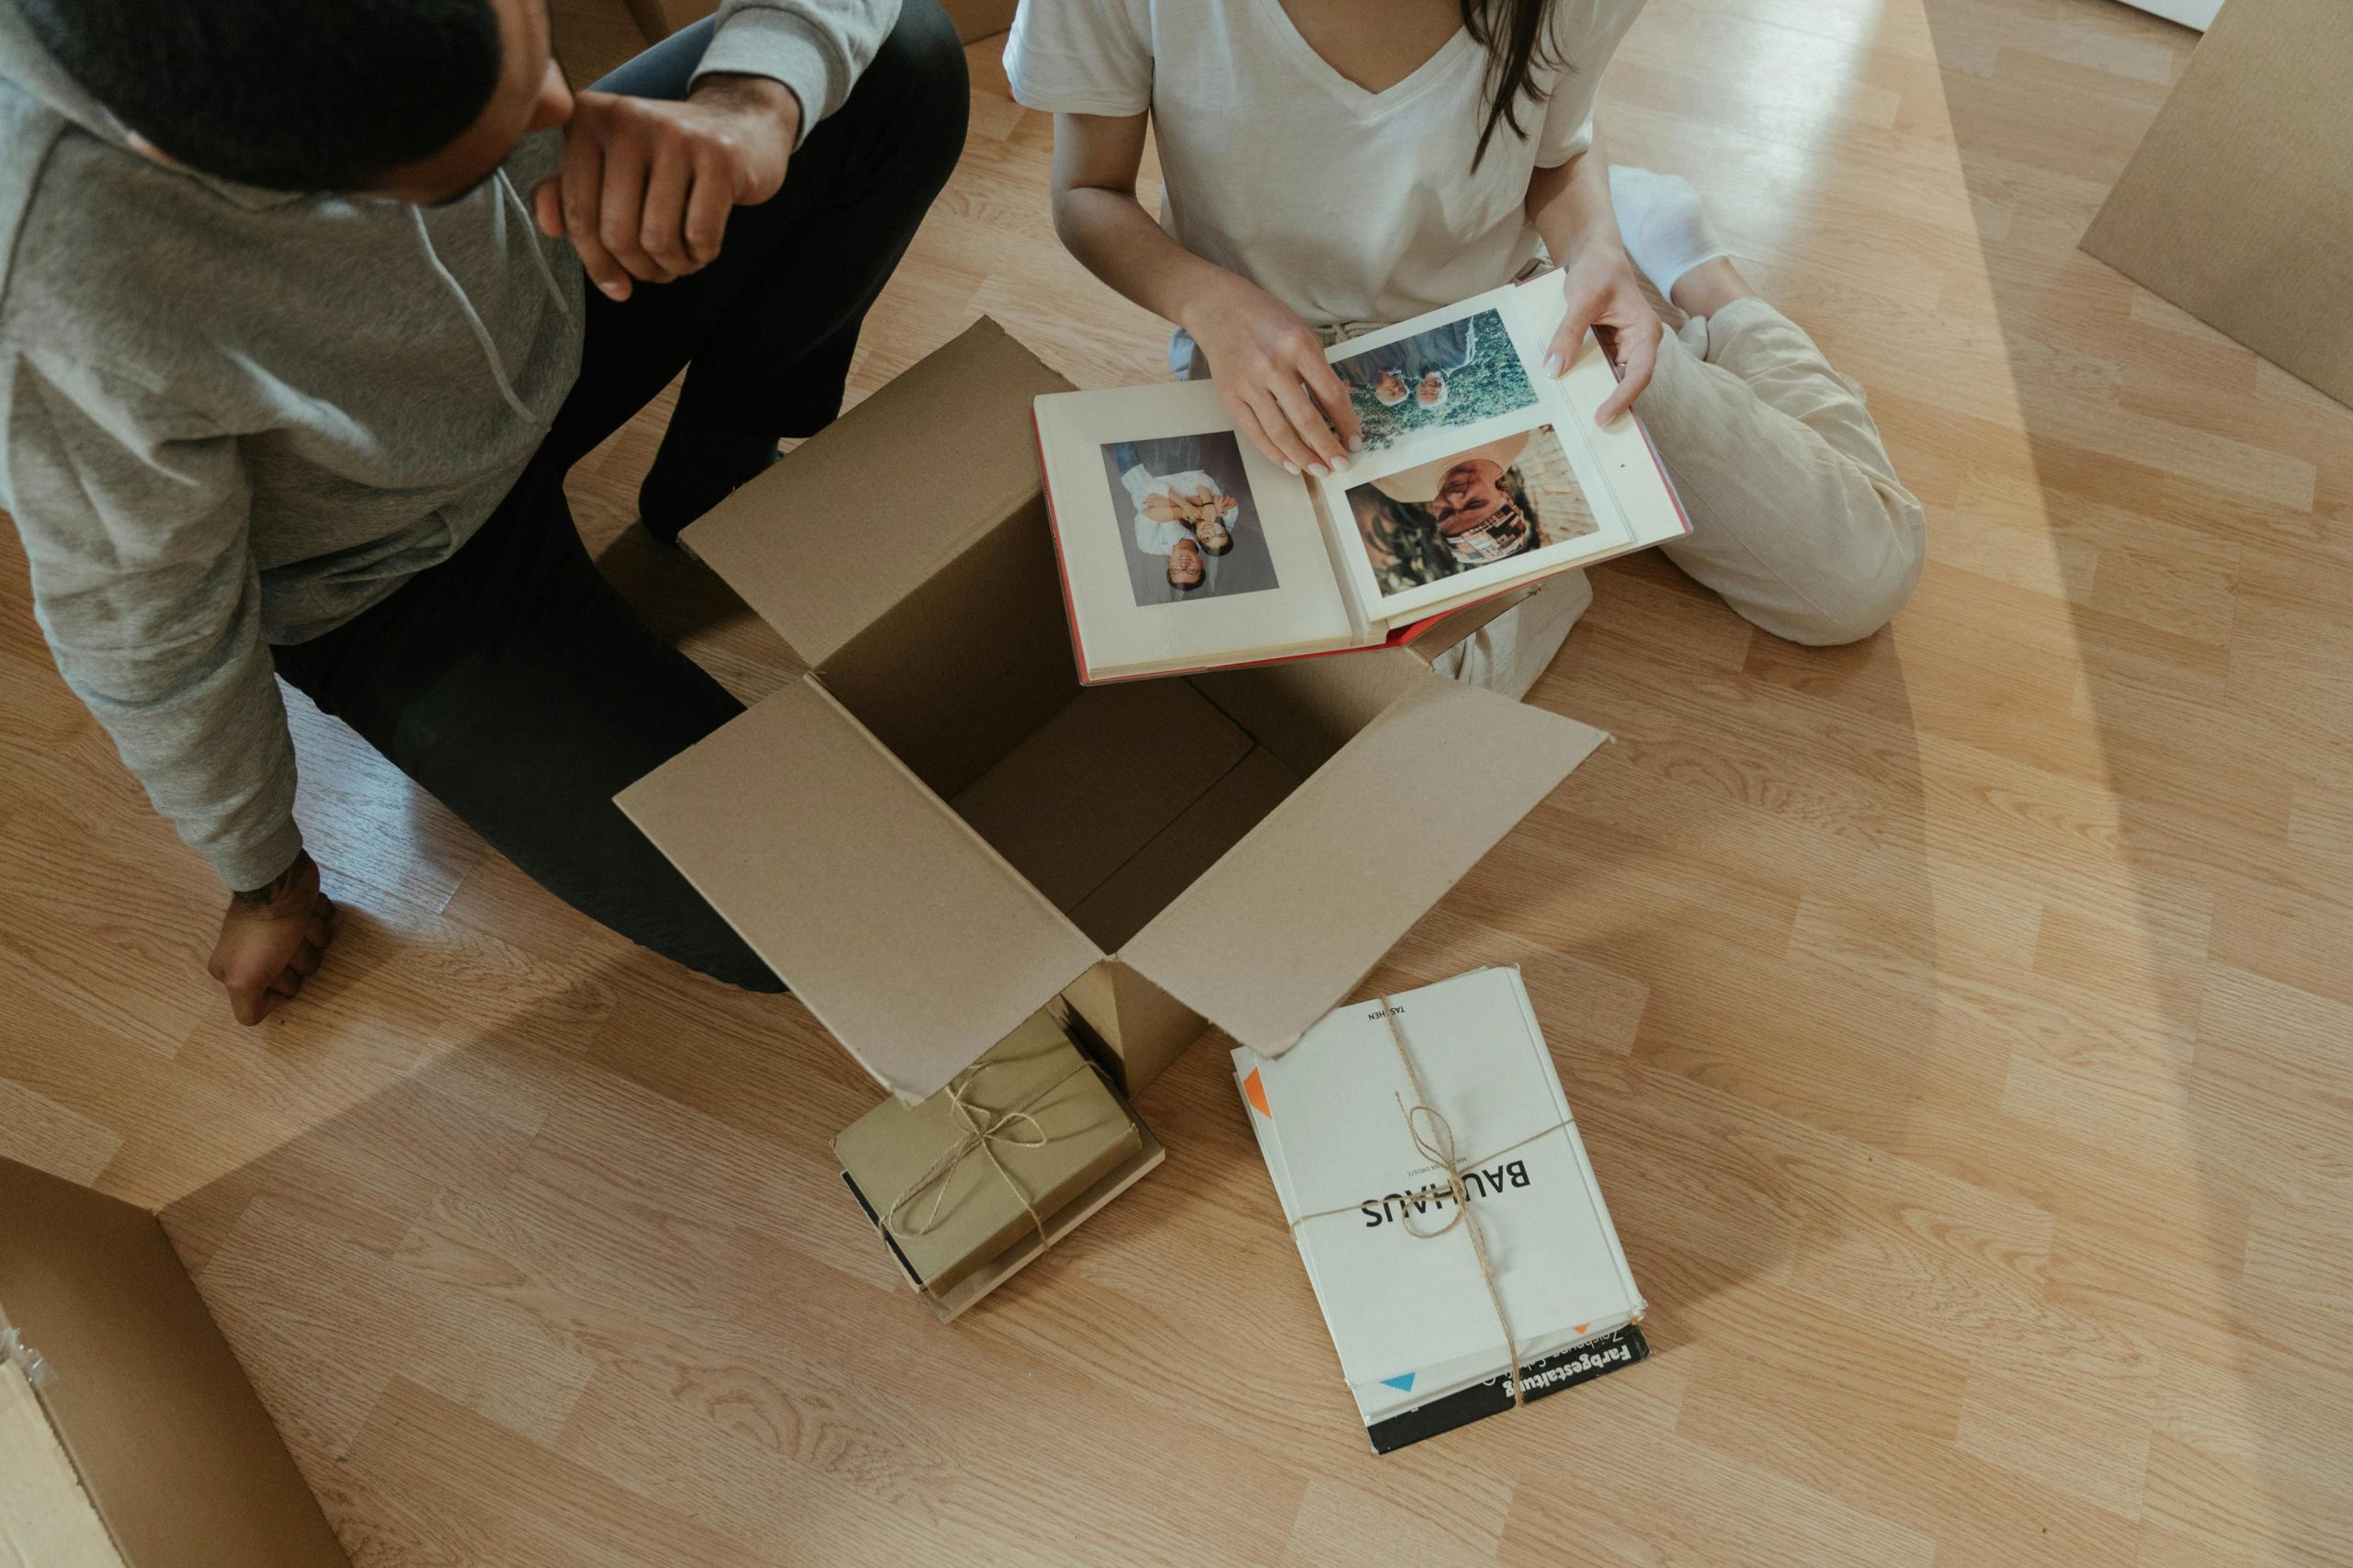 Overhead shot of two people sitting on the floor next to a cardboard box and looking at a photo album